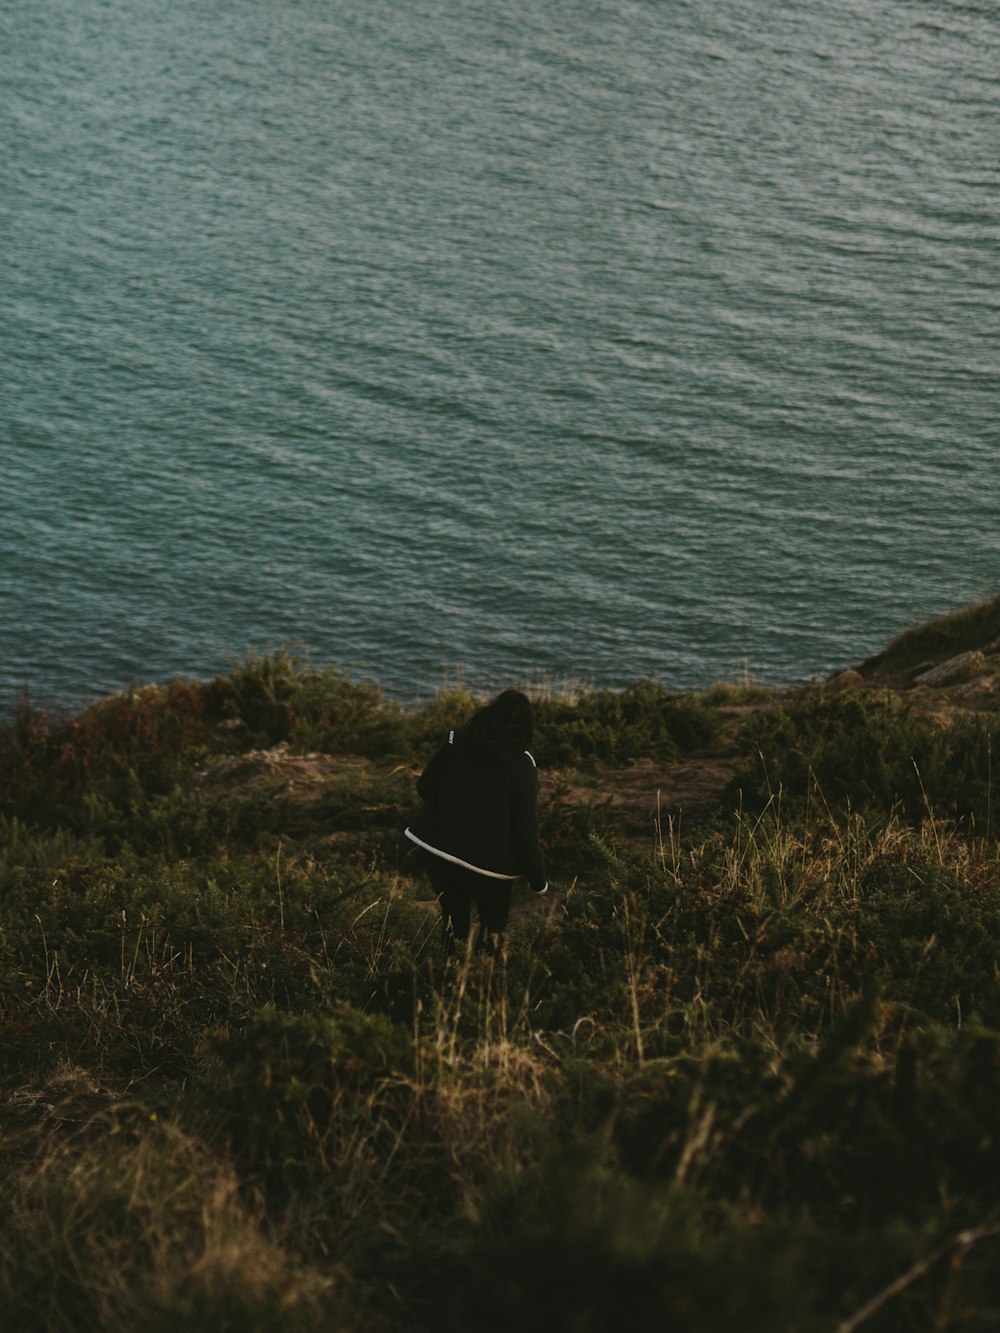 a person sitting on a hill overlooking a body of water